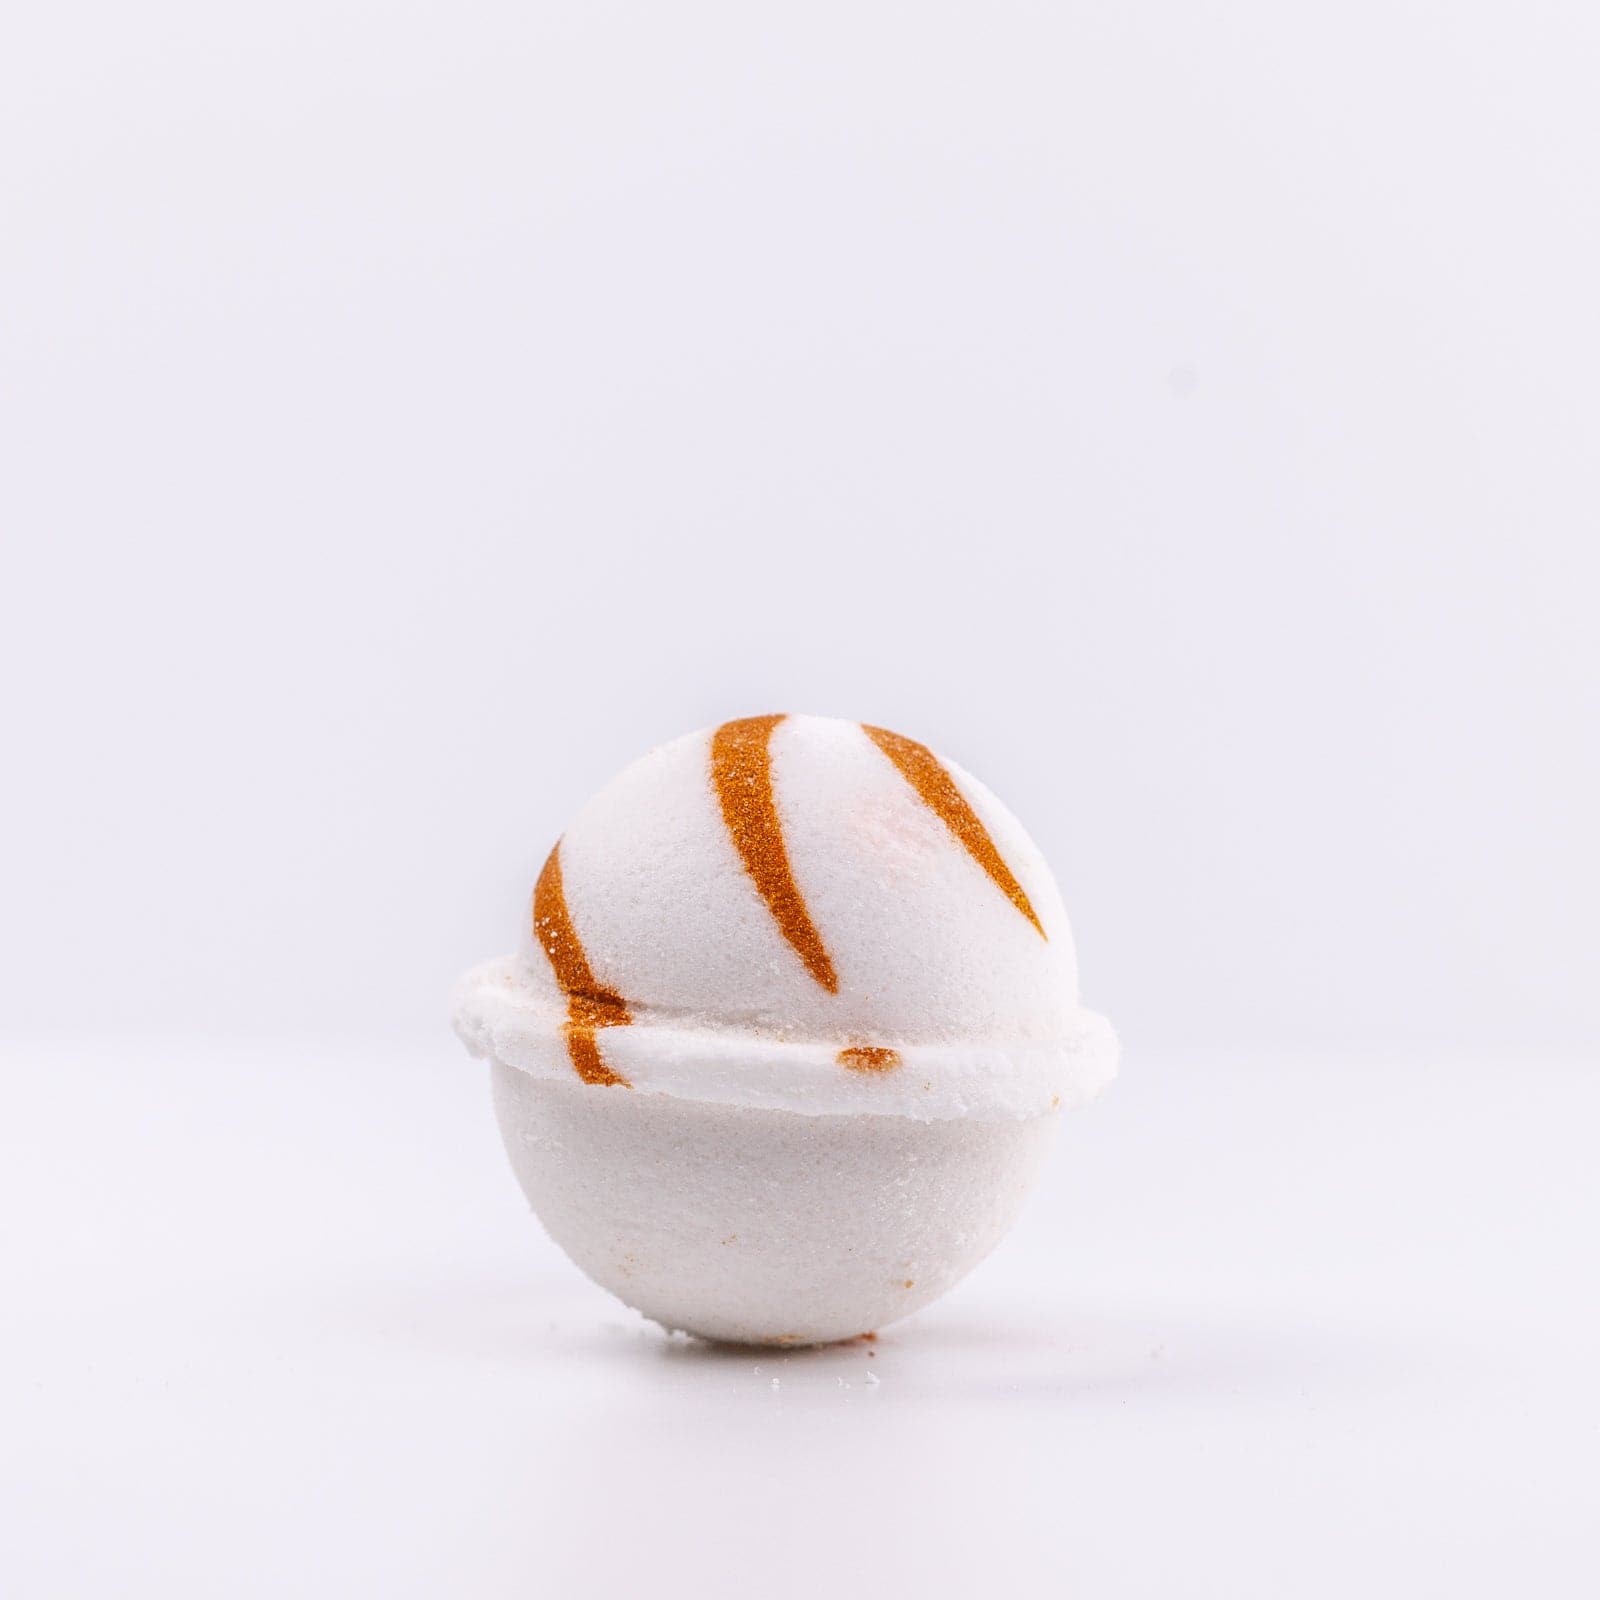 a white Narcissist Bath Bomb, with caramel design, placed upright